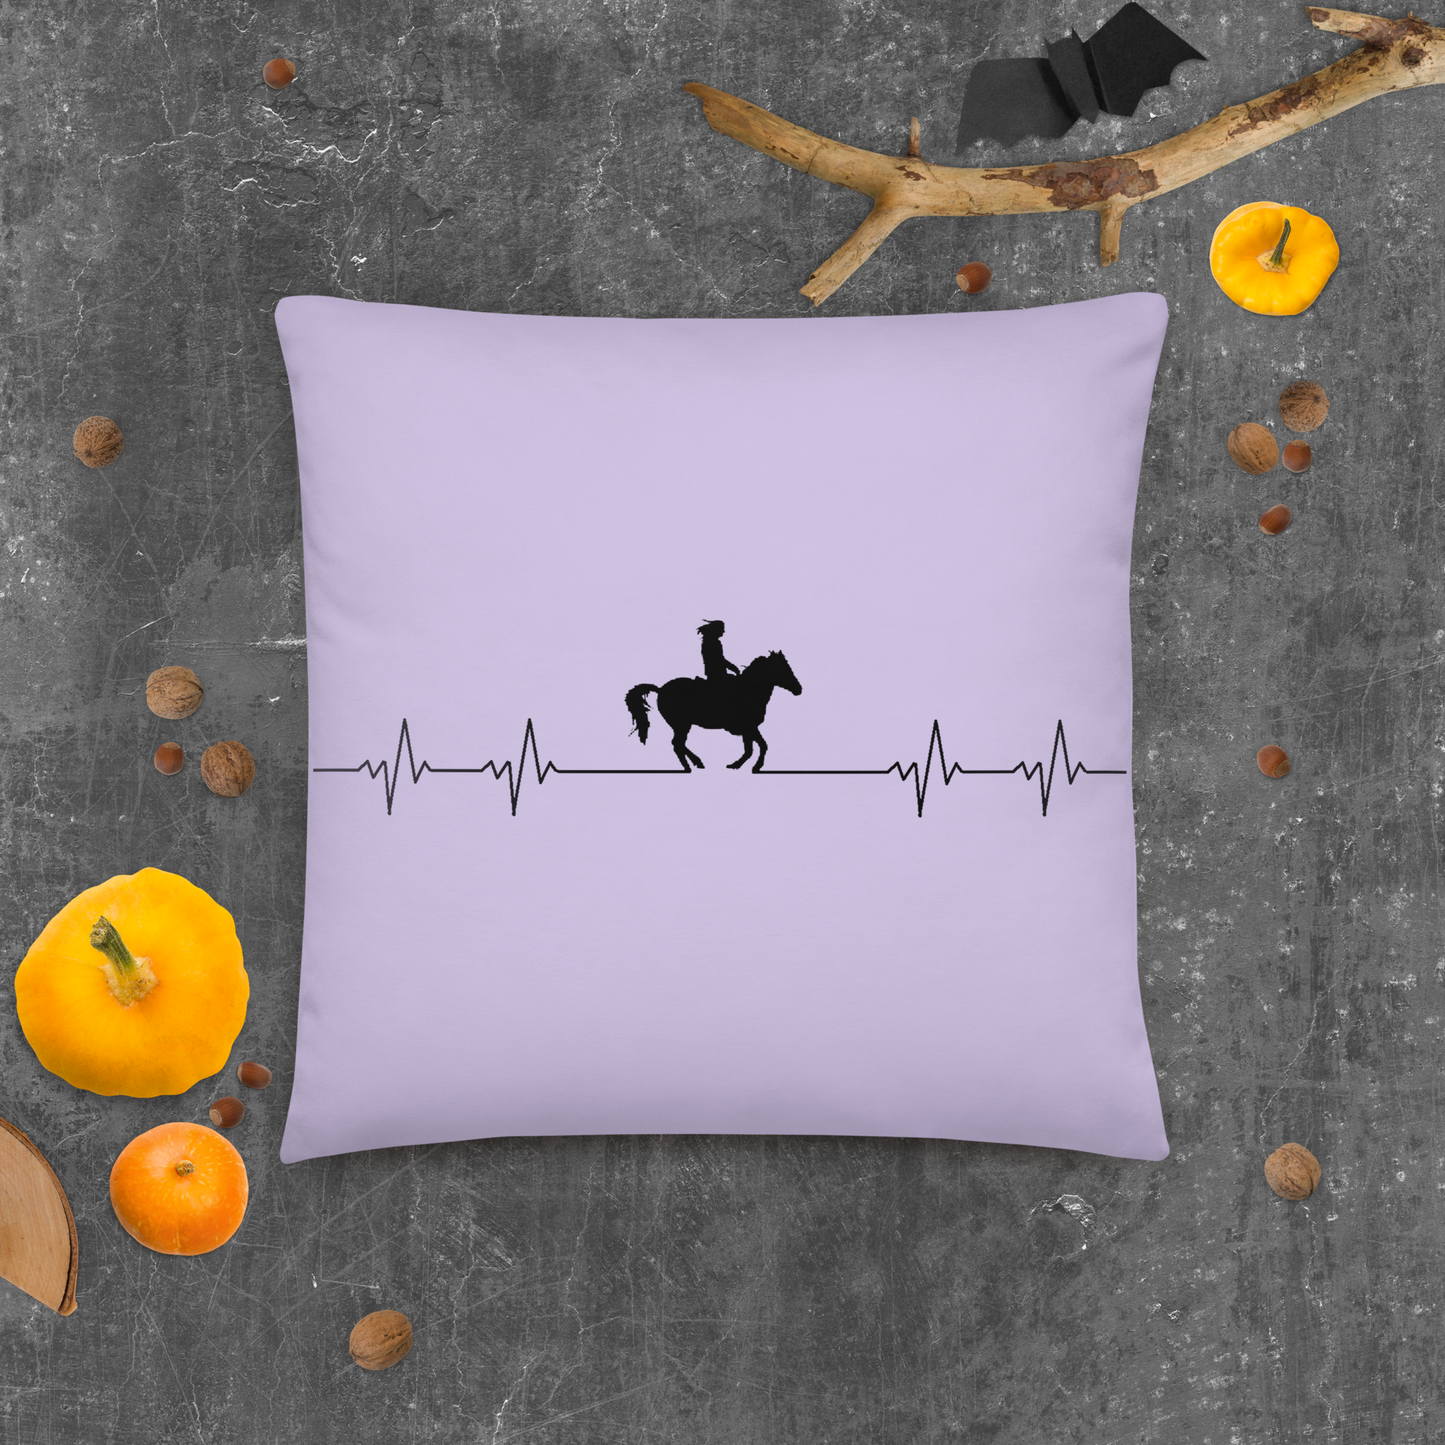 Hand Drawn Horse || Horse Square Throw Pillow - Design: "Heartbeat"; Static Design; Personalizable Text